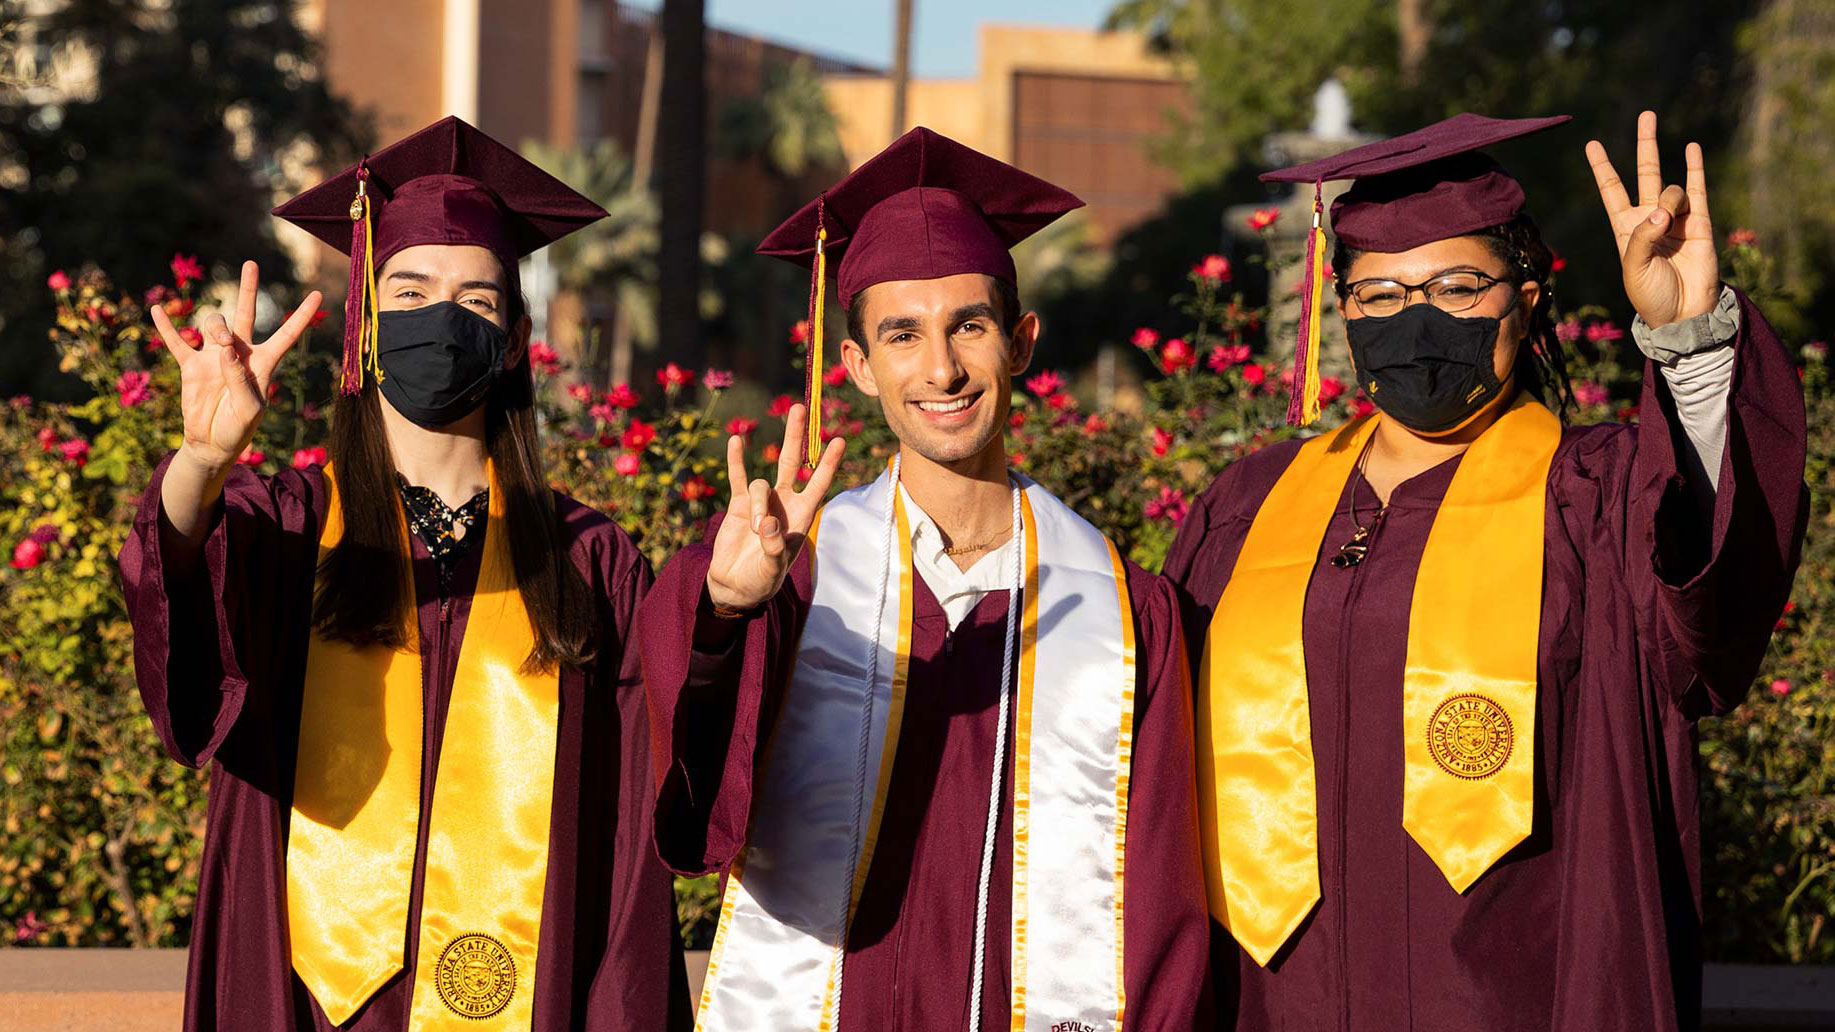 Three students in graduation gowns and caps make the pitchfork gesture; one is unmasked and two have masks on